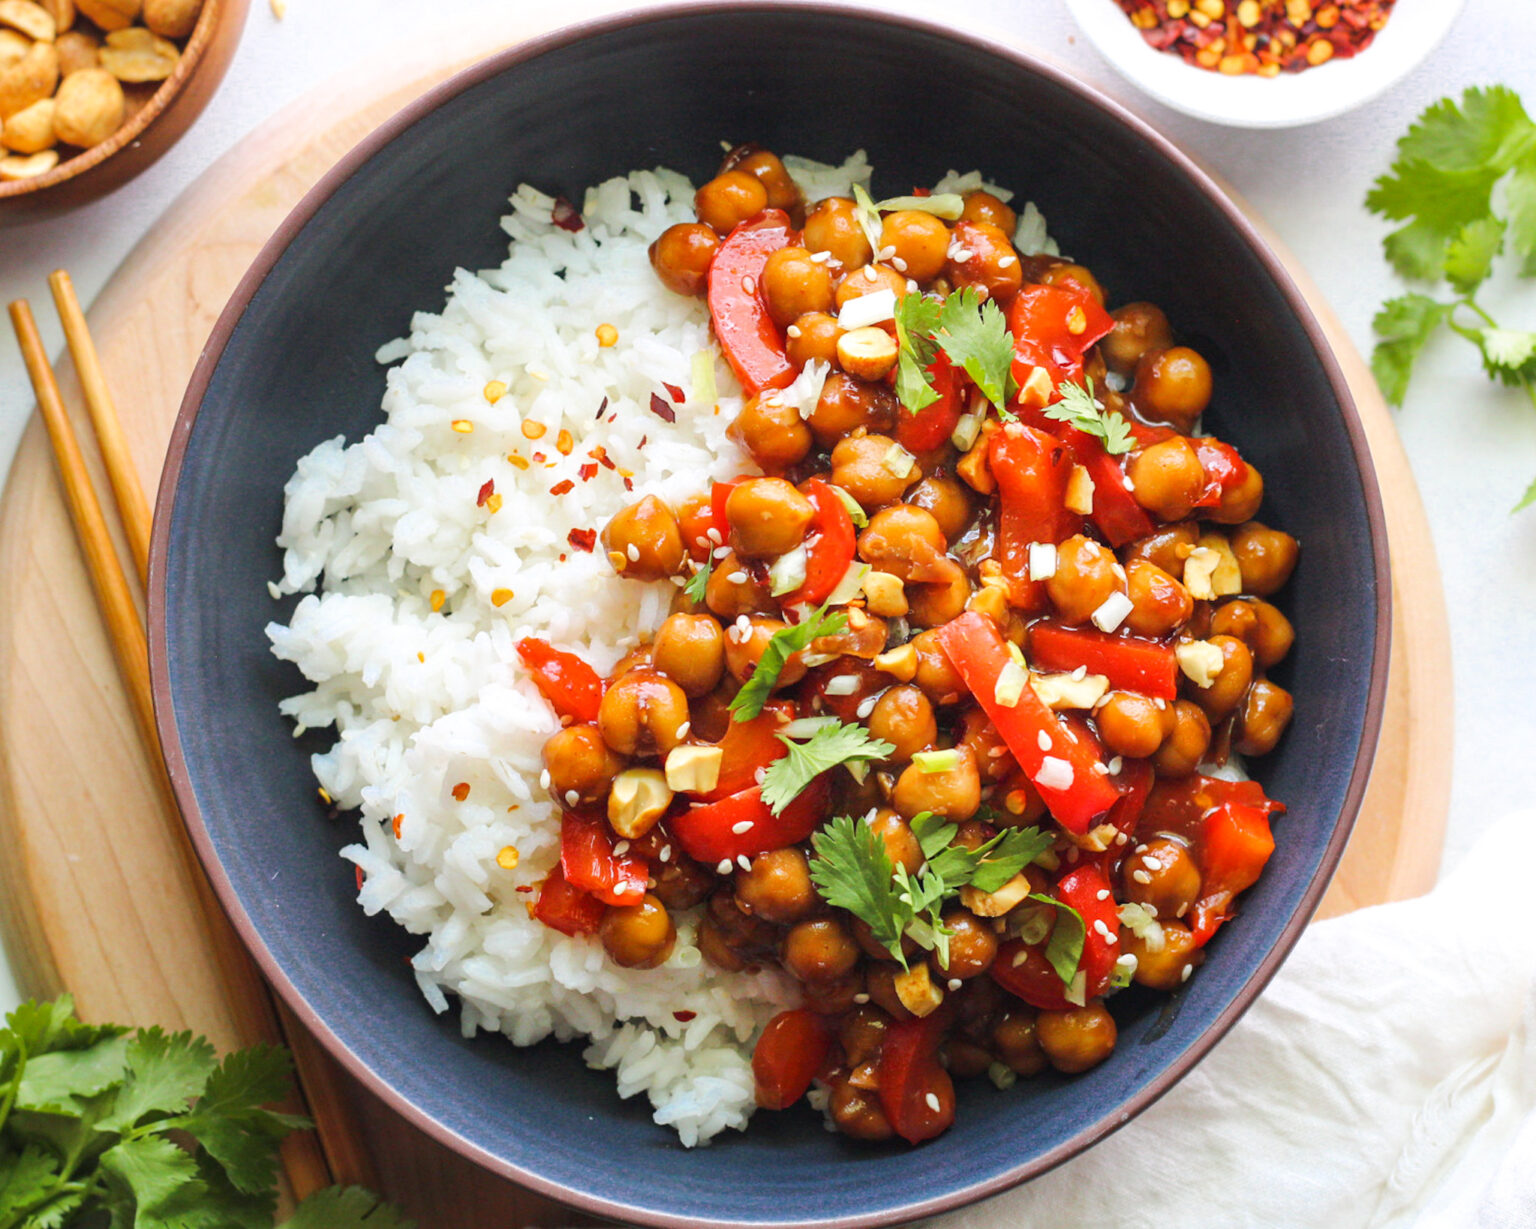 Chickpea-and-Vegetable-Stir-Fry